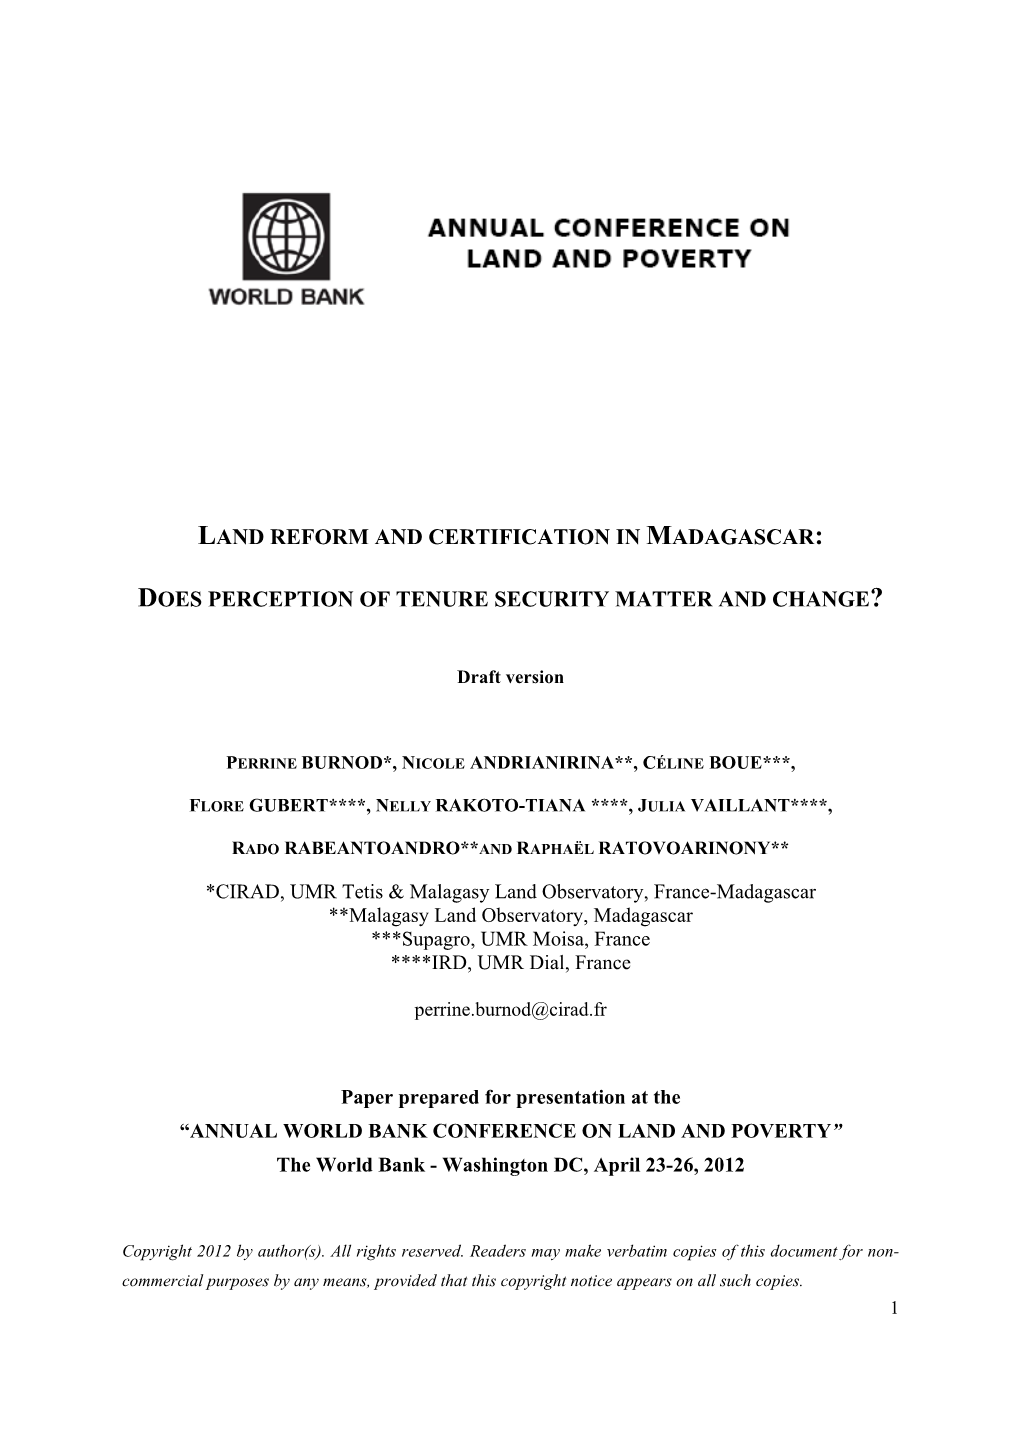 Land Reform and Certification in Madagascar